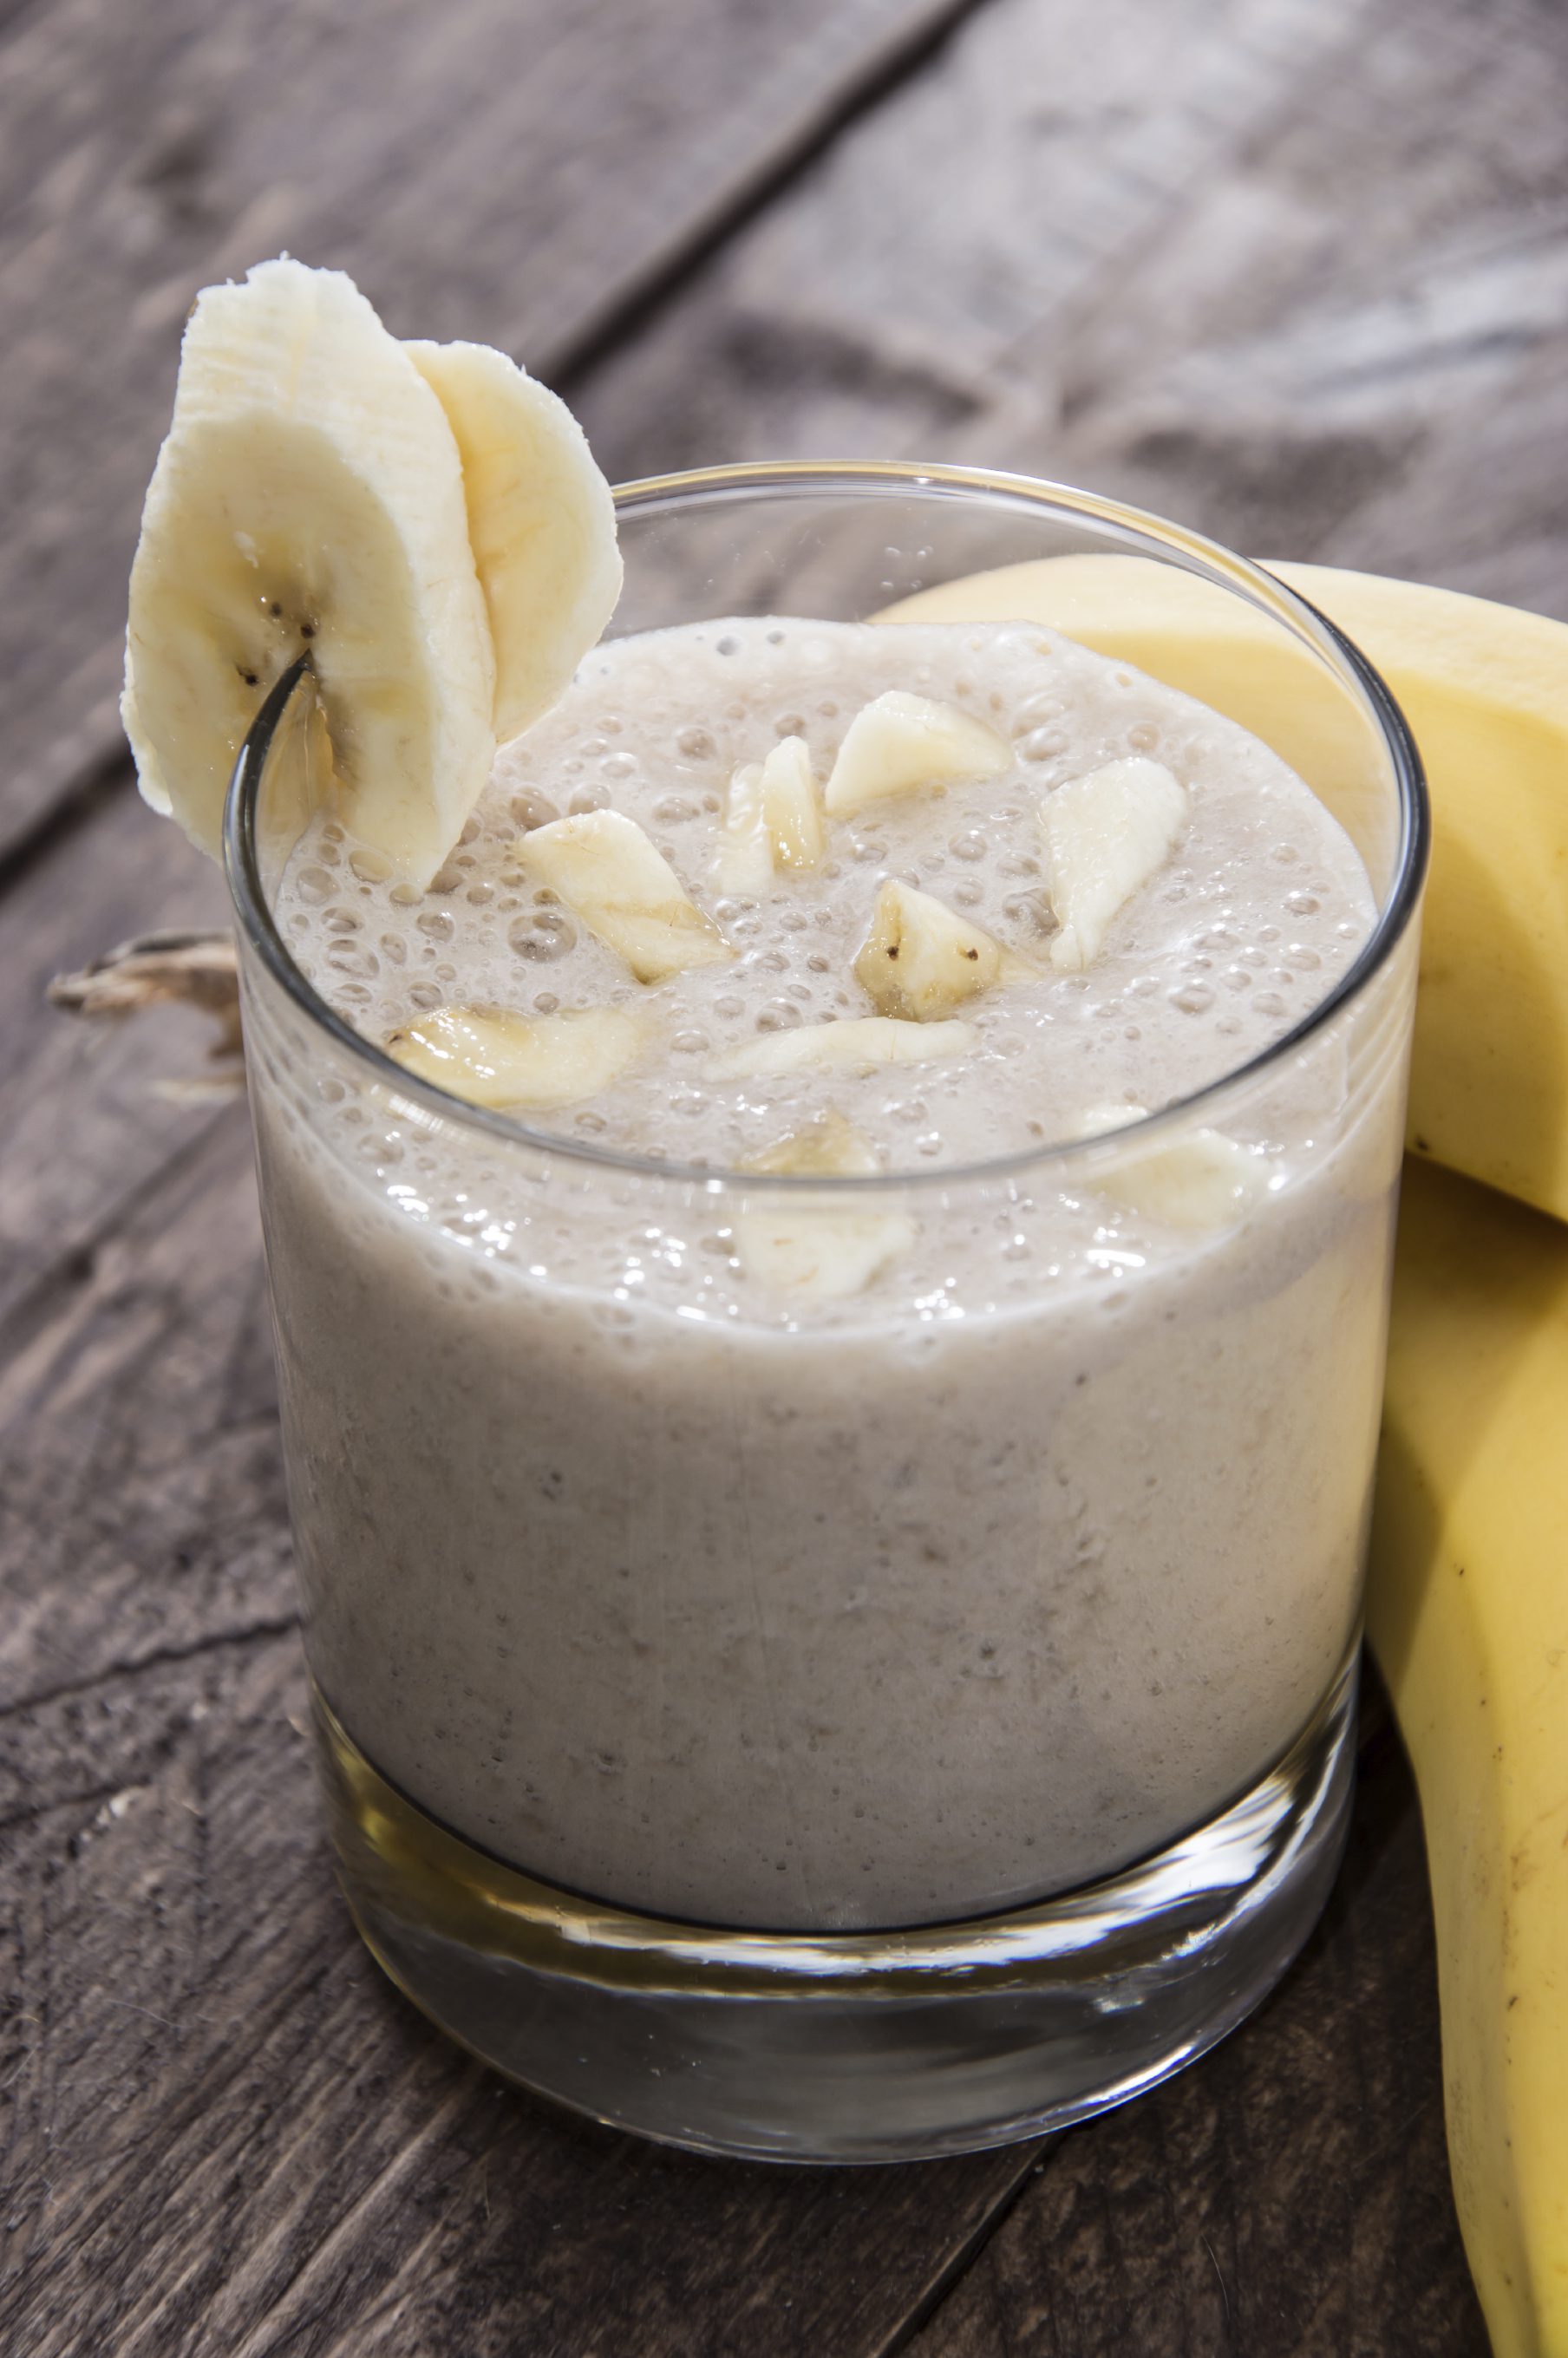 peanut butter banana protein smoothie